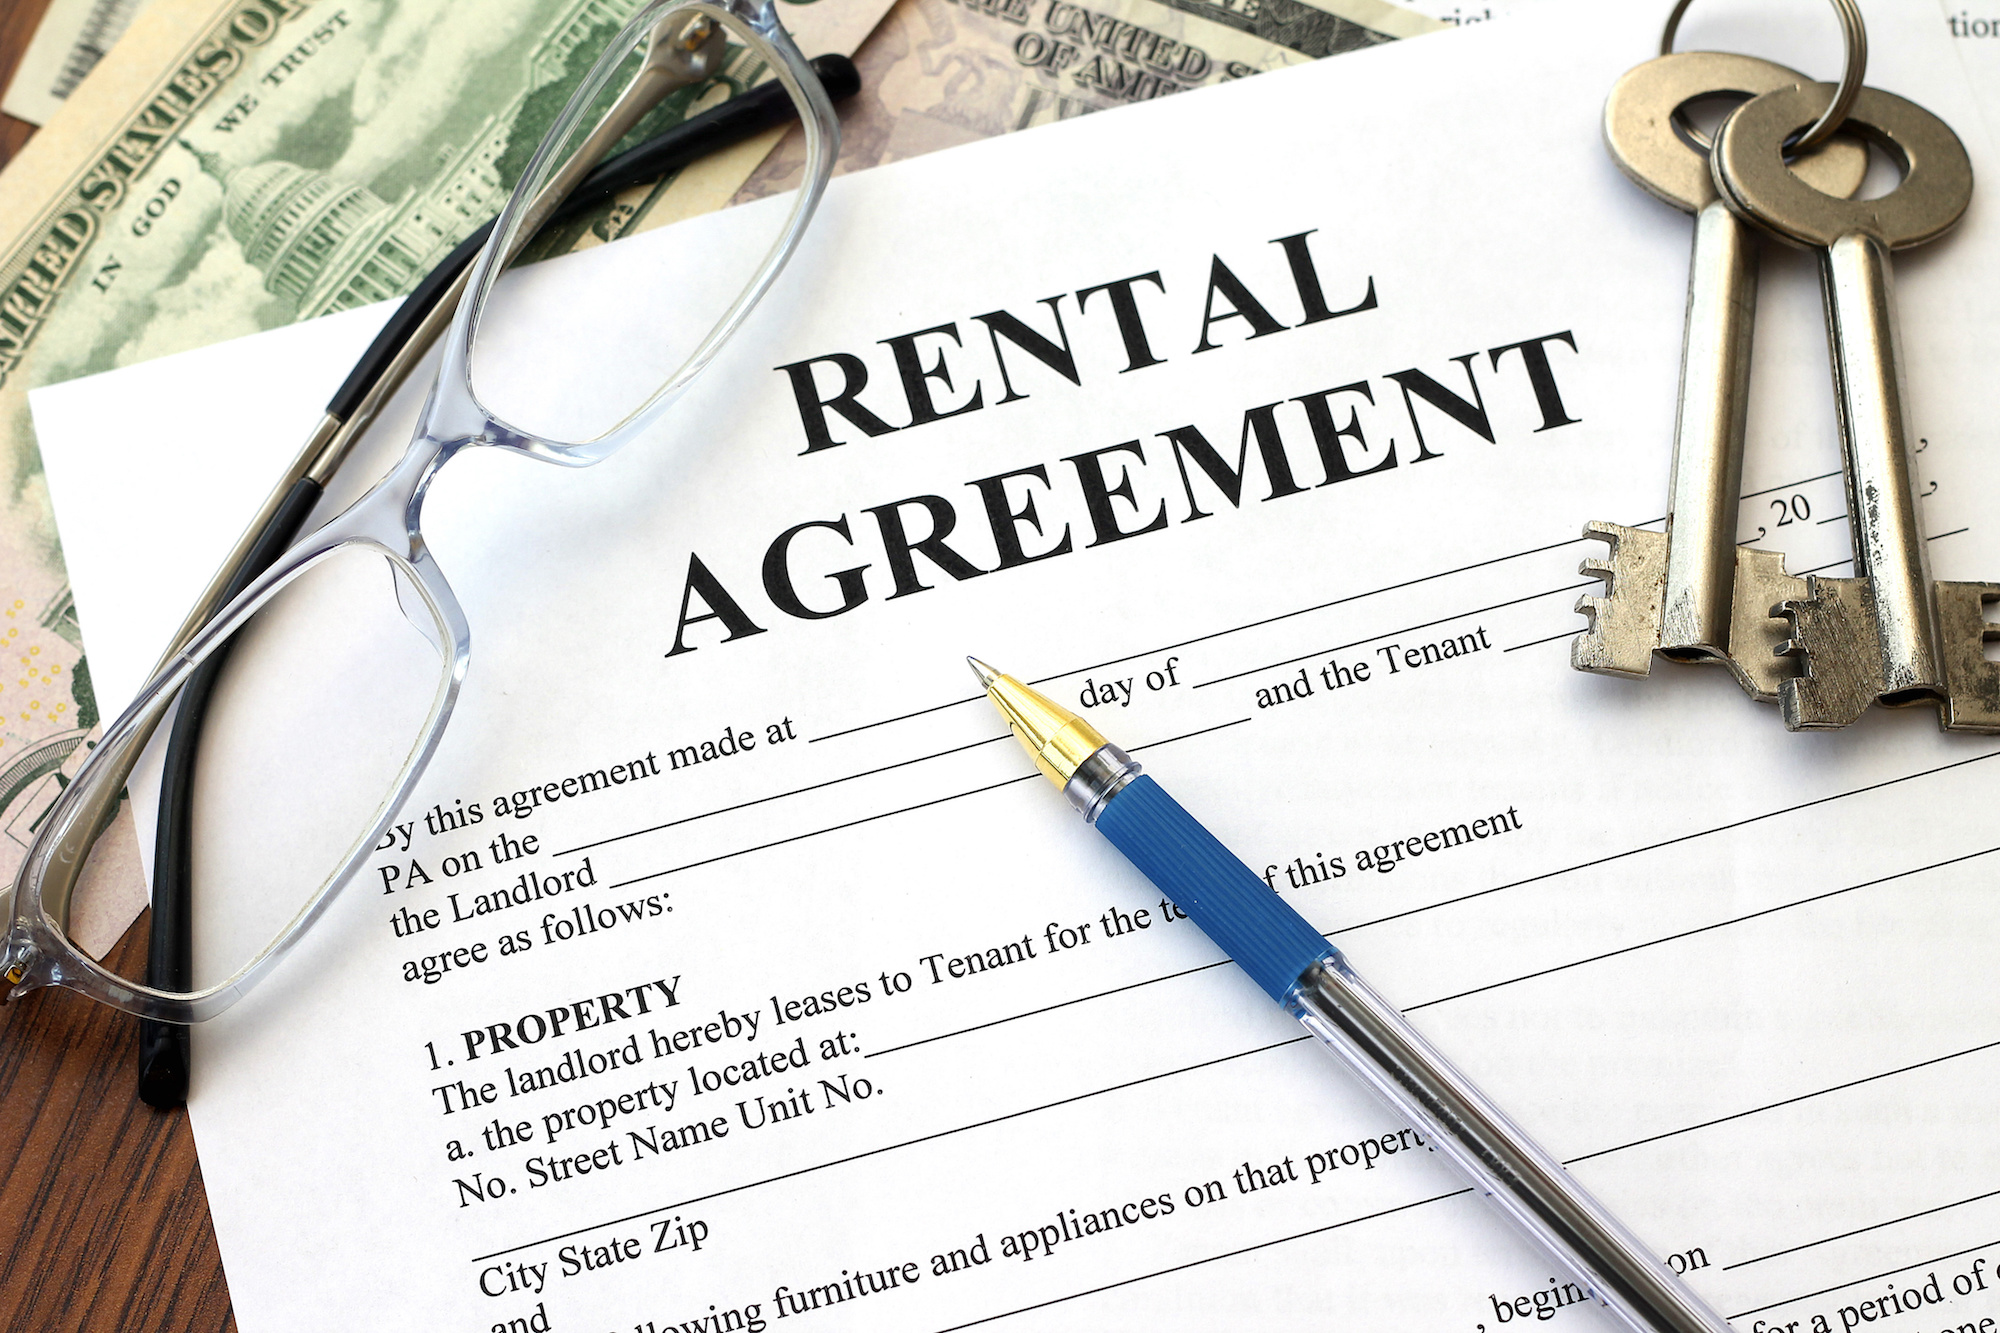 Rental agreement contract on a desk with a pen. 